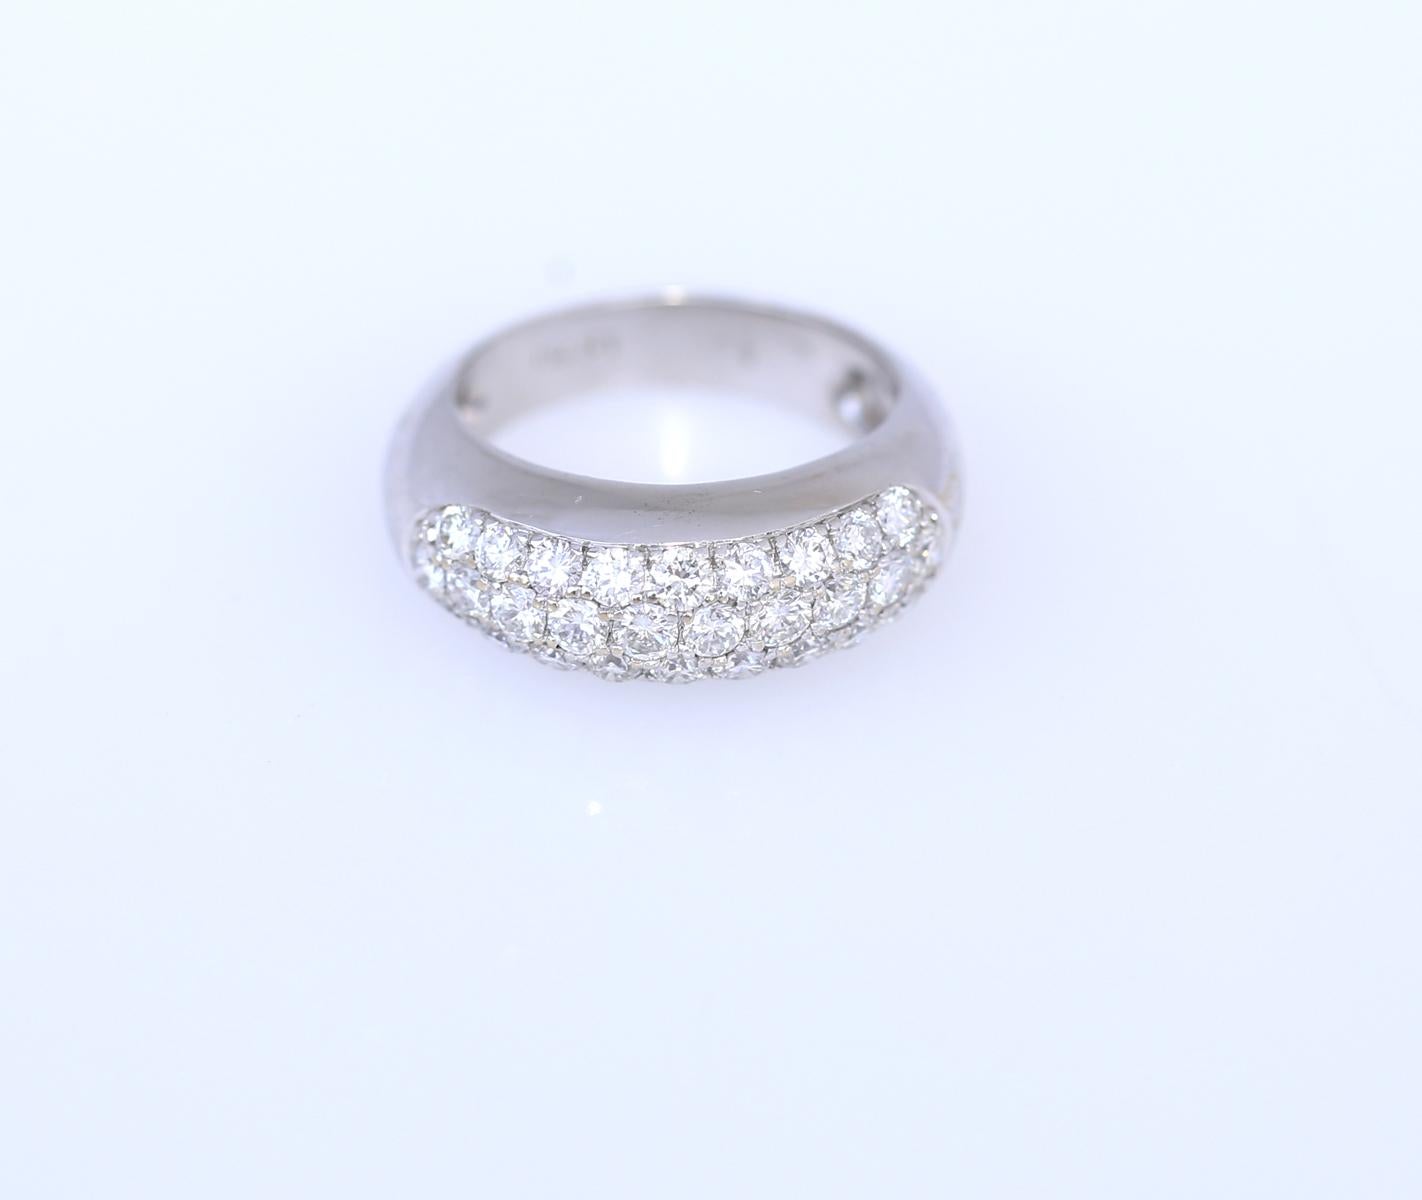 Round Cut Diamond Ring 1.3Ct 18K White Gold, 2010 For Sale